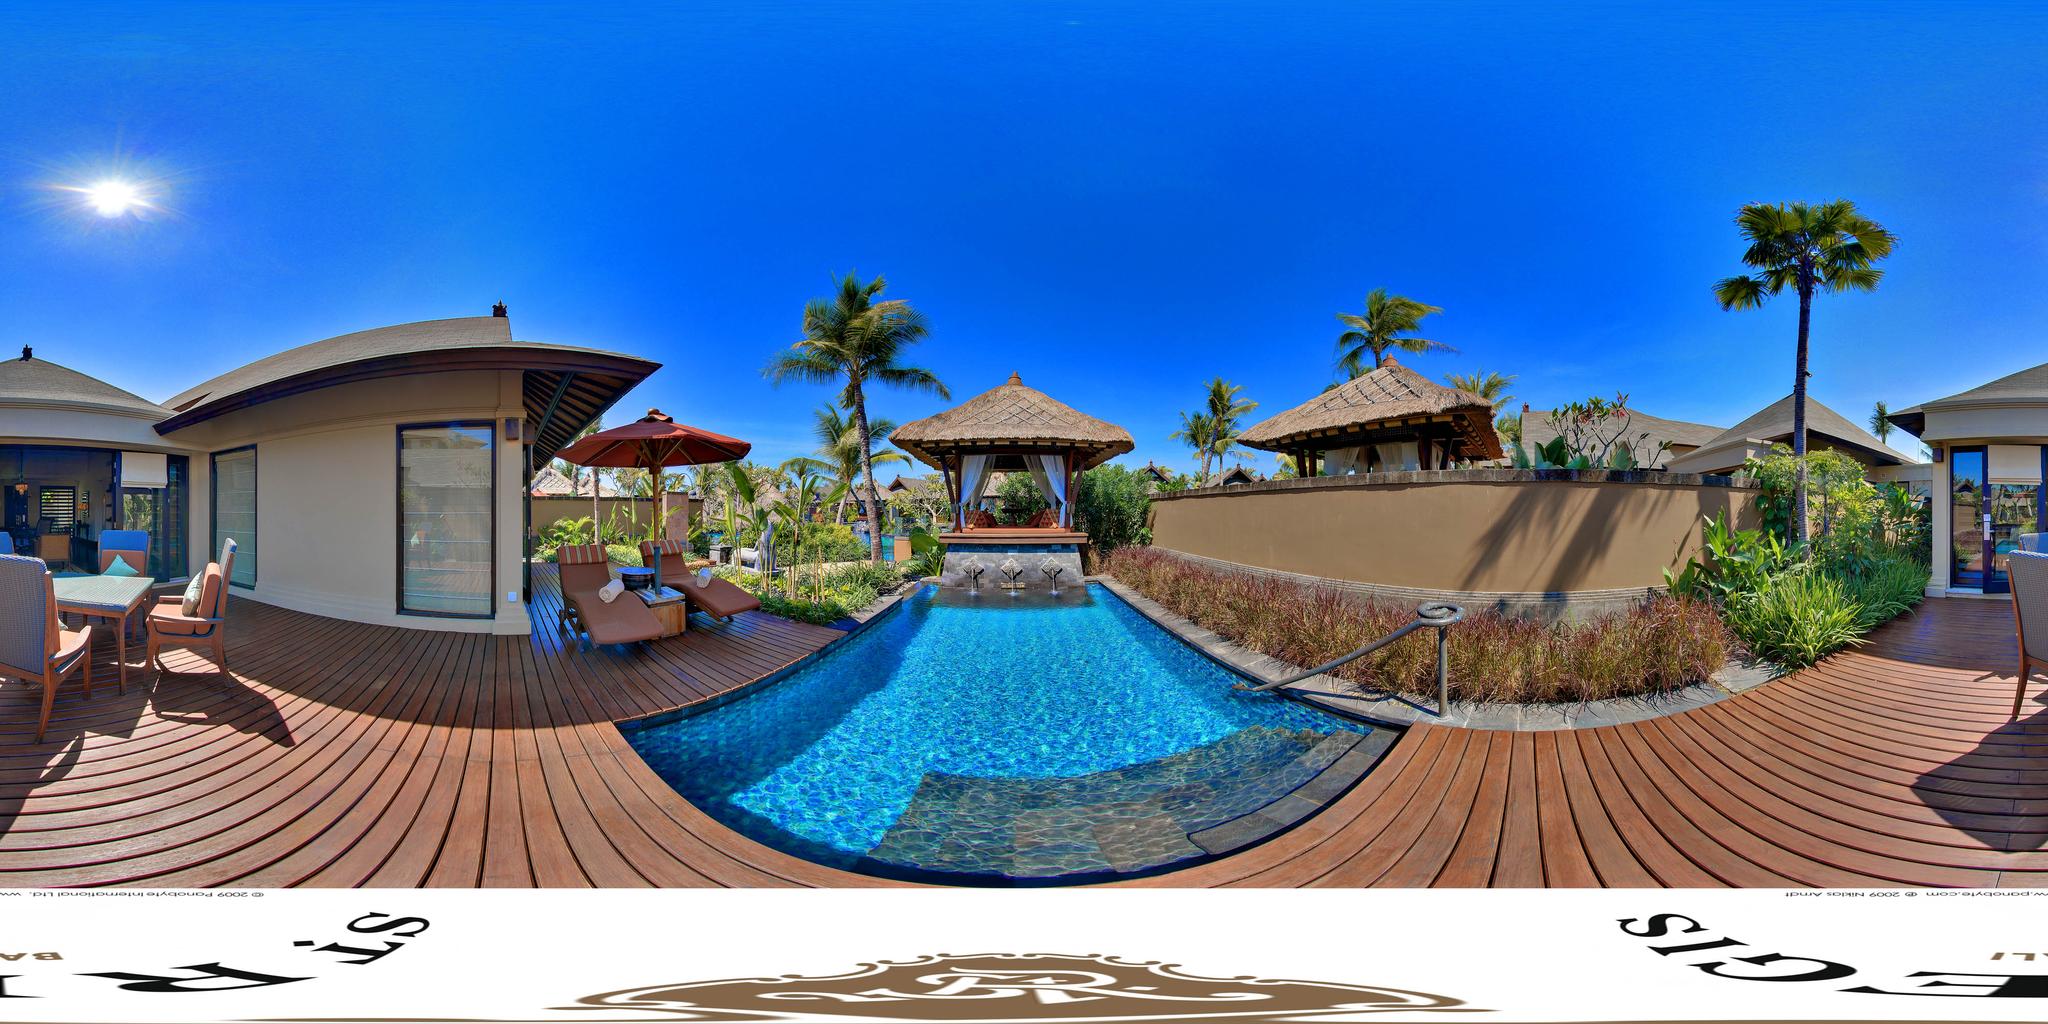 The St. Regis Bali Resort | Luxury Bali Holiday Booking | All Inclusive